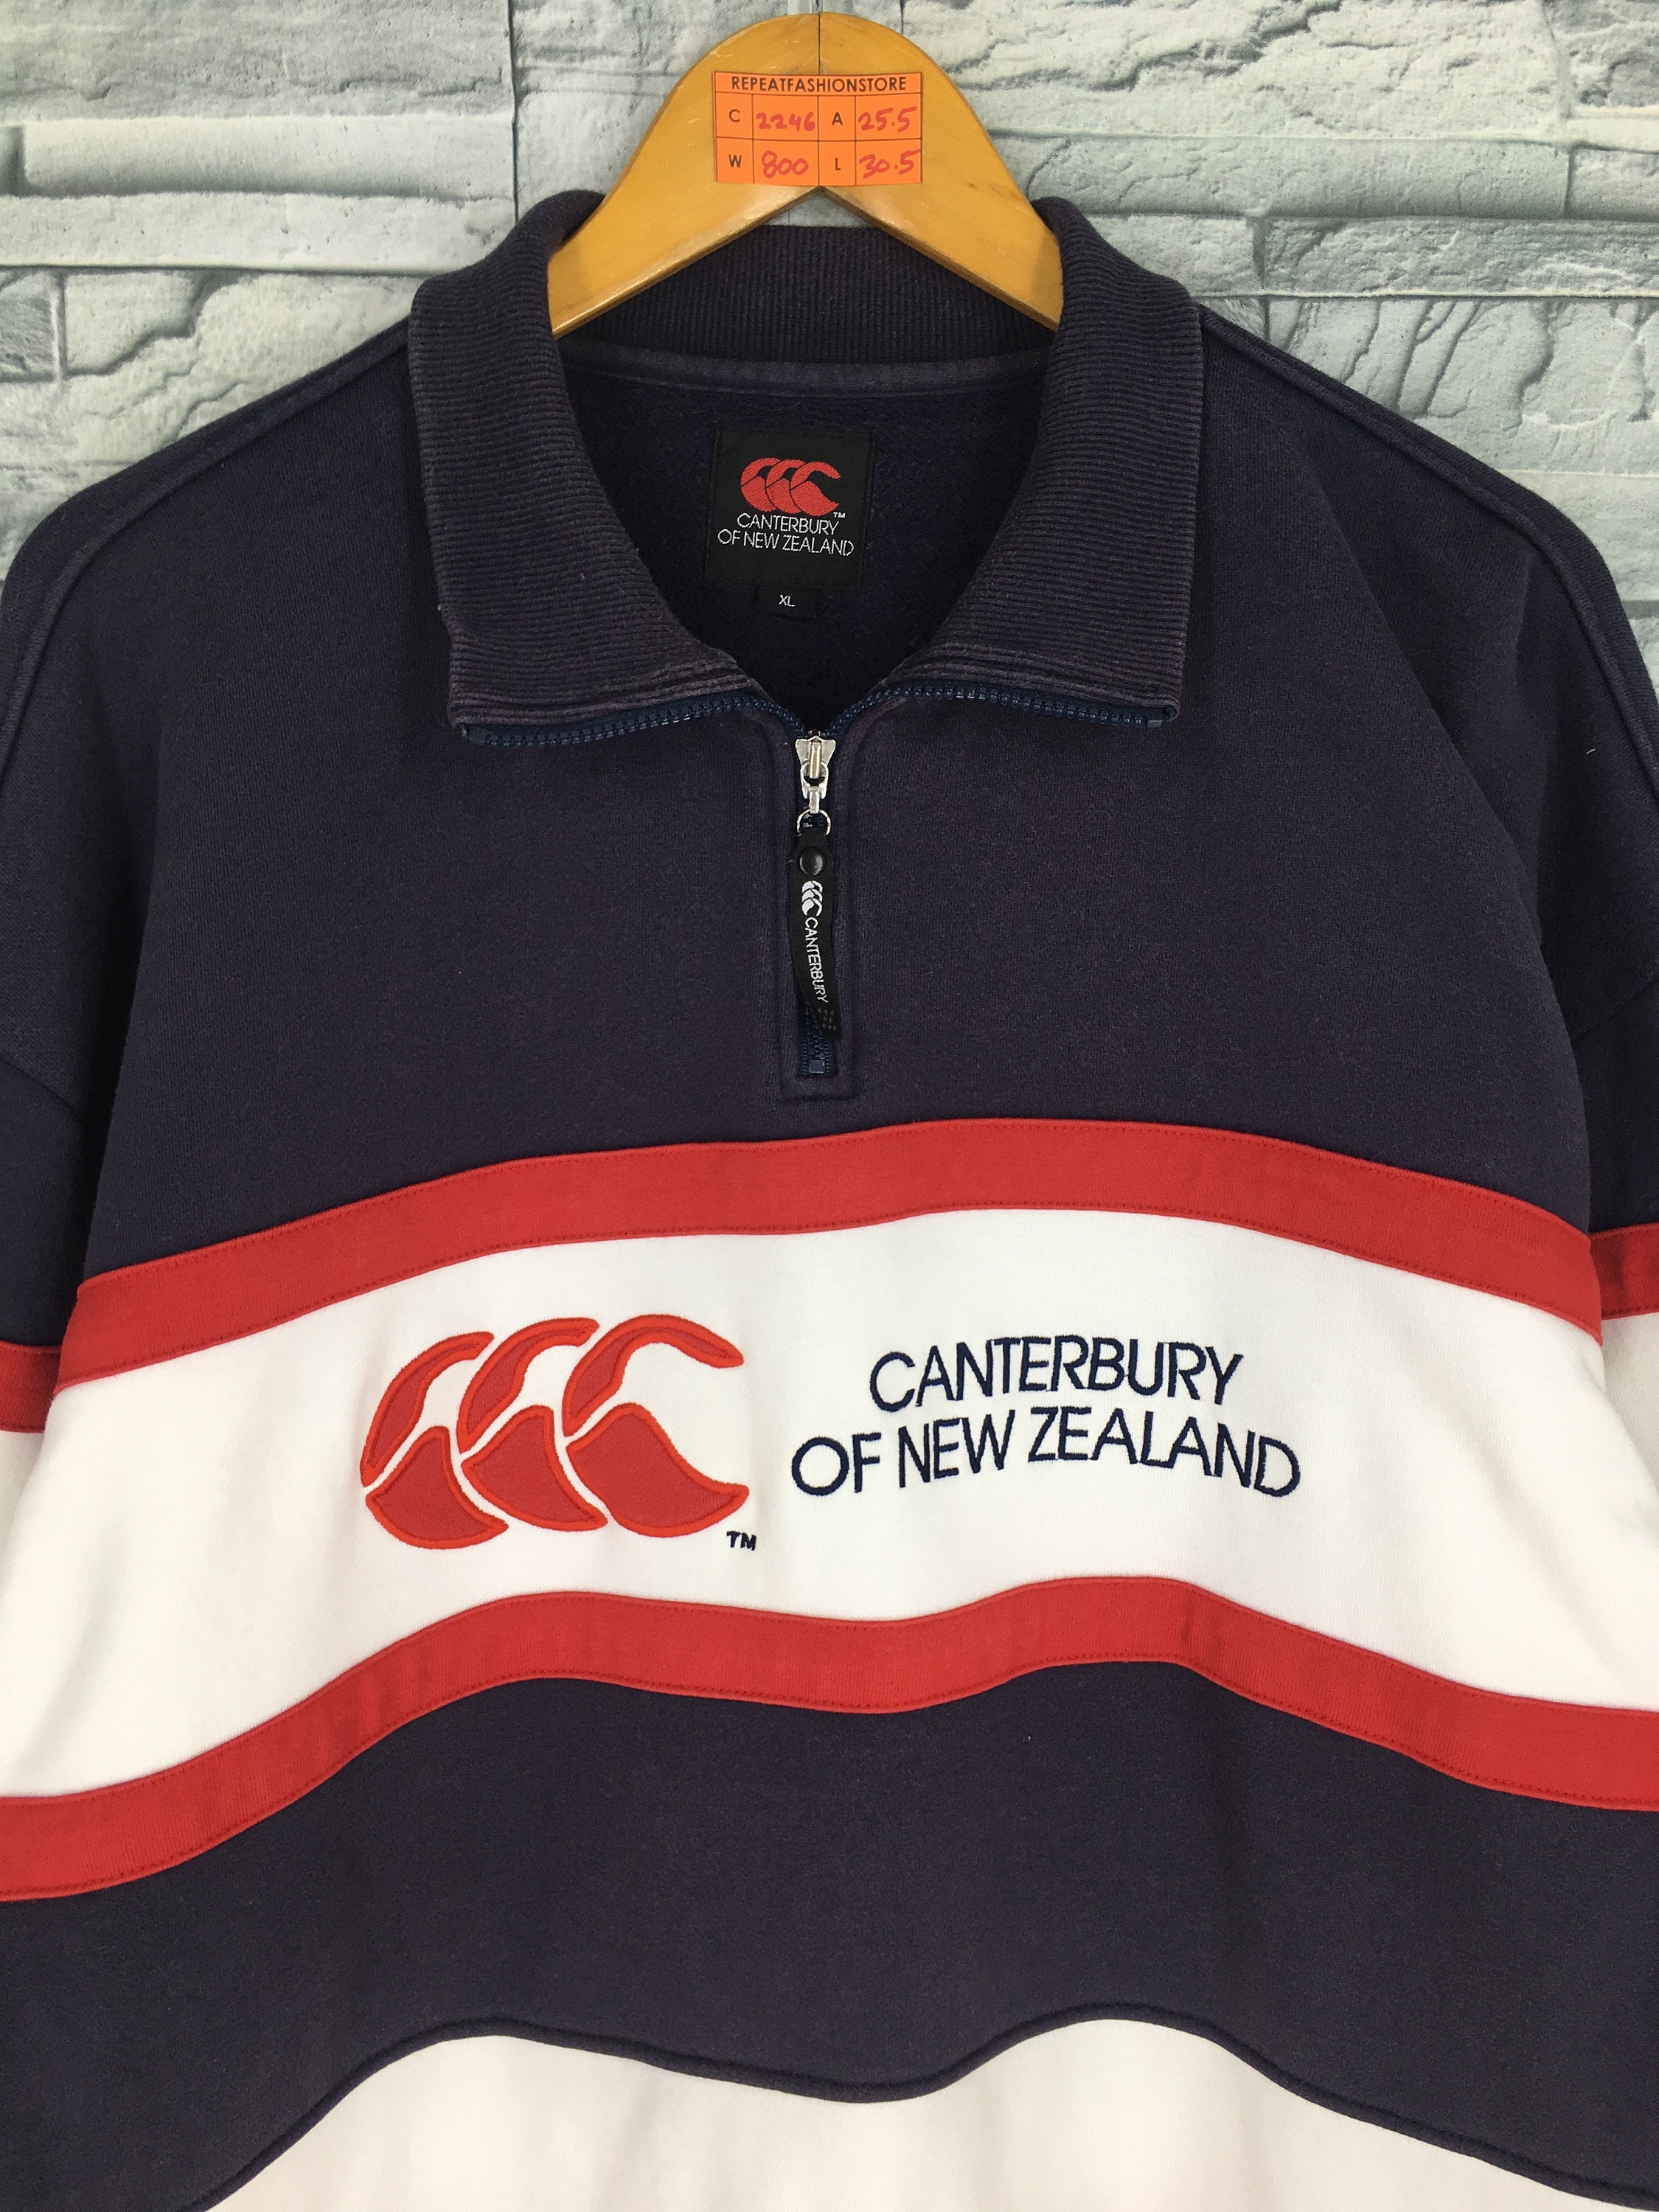 Canterbury Rugby Sweater XLarge Vintage 90's Canterbury Of New Zealand All Blacks Rugby Football Blue Sweatshirt Pullover Size XL